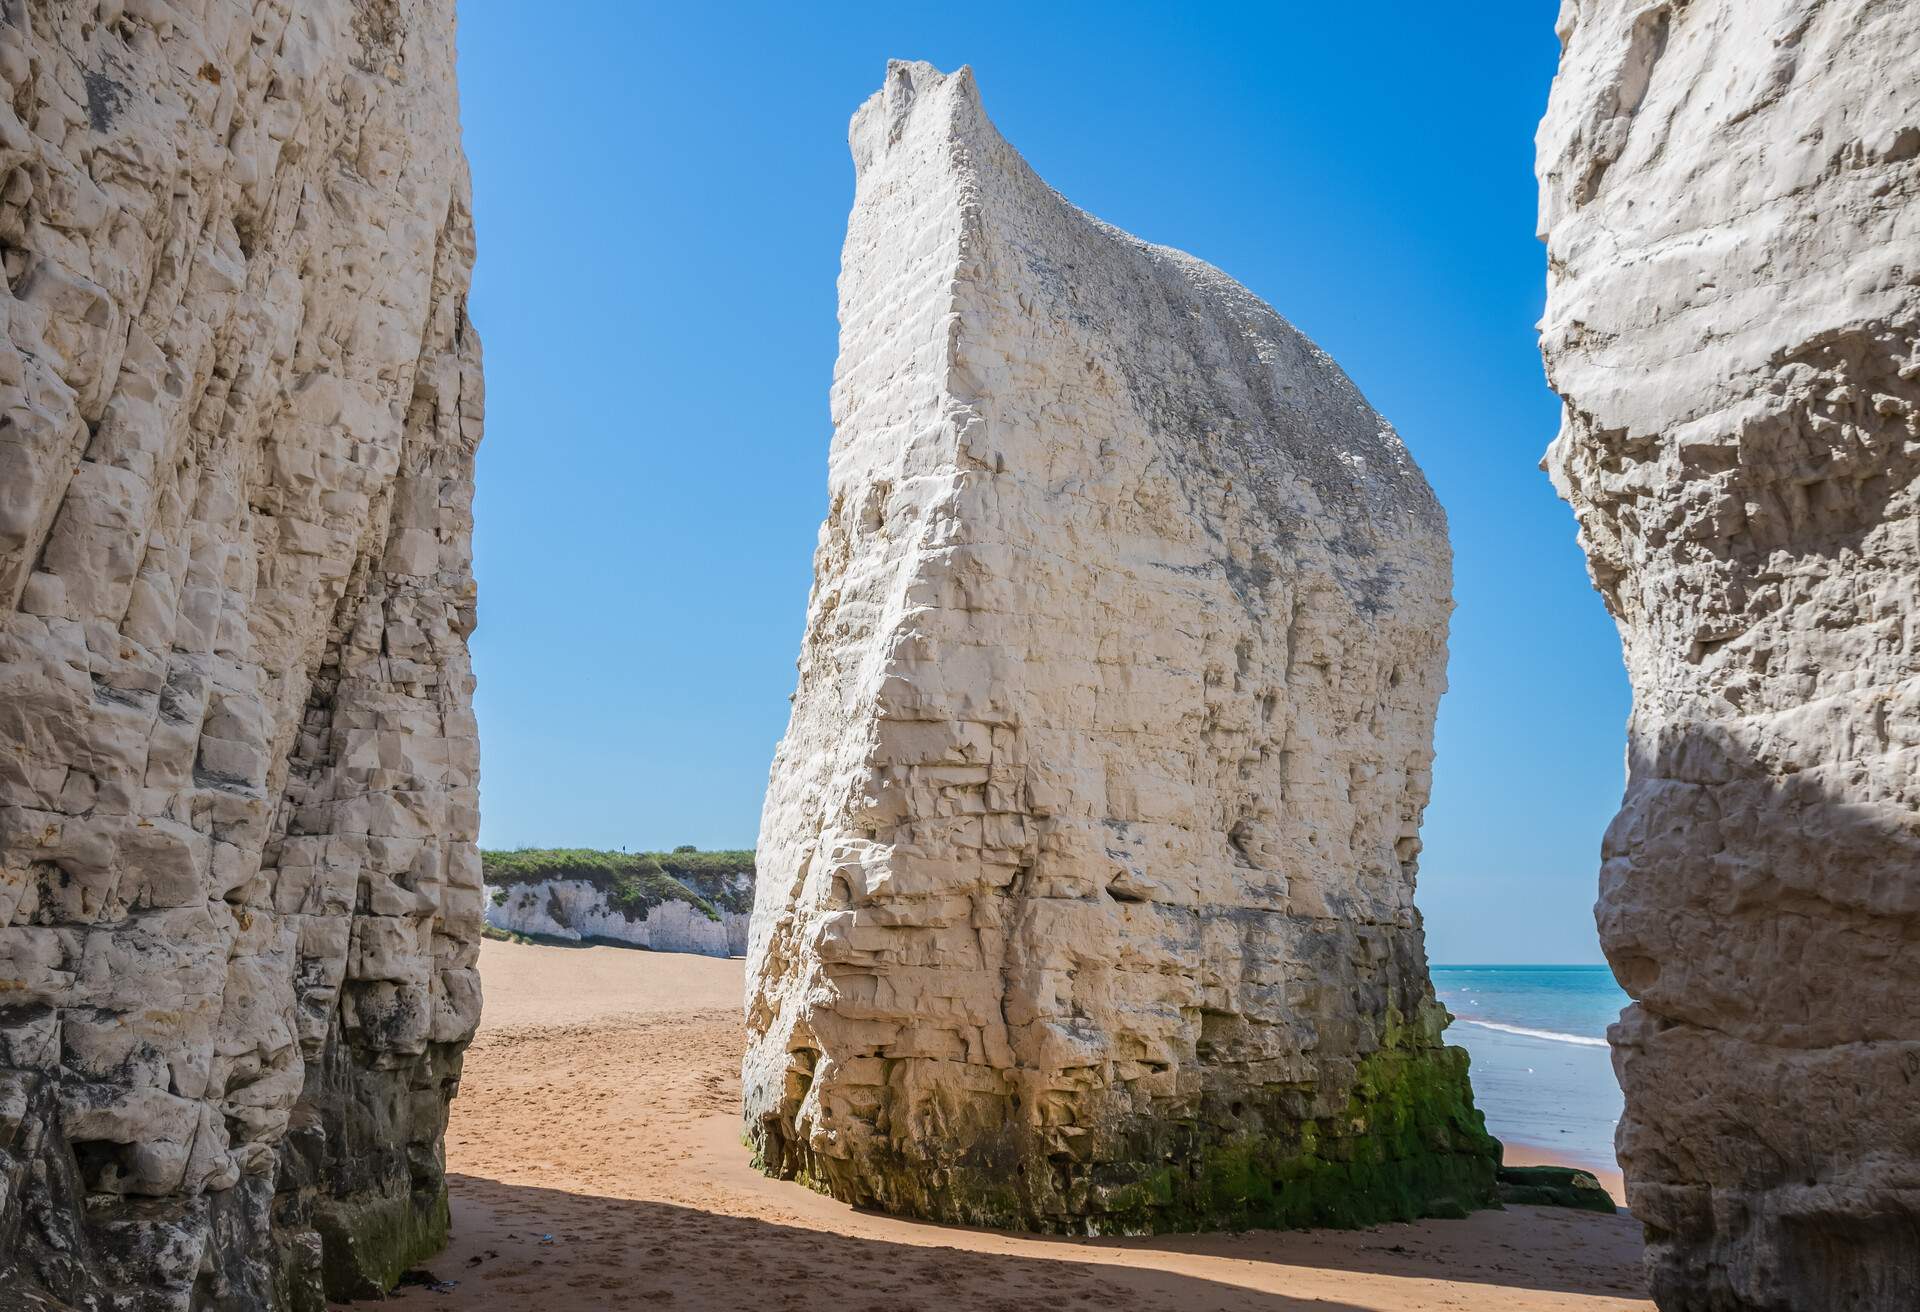 Alongside a turquoise bay surrounded by chalk cliffs are steep vertical rock stacks on golden sands.